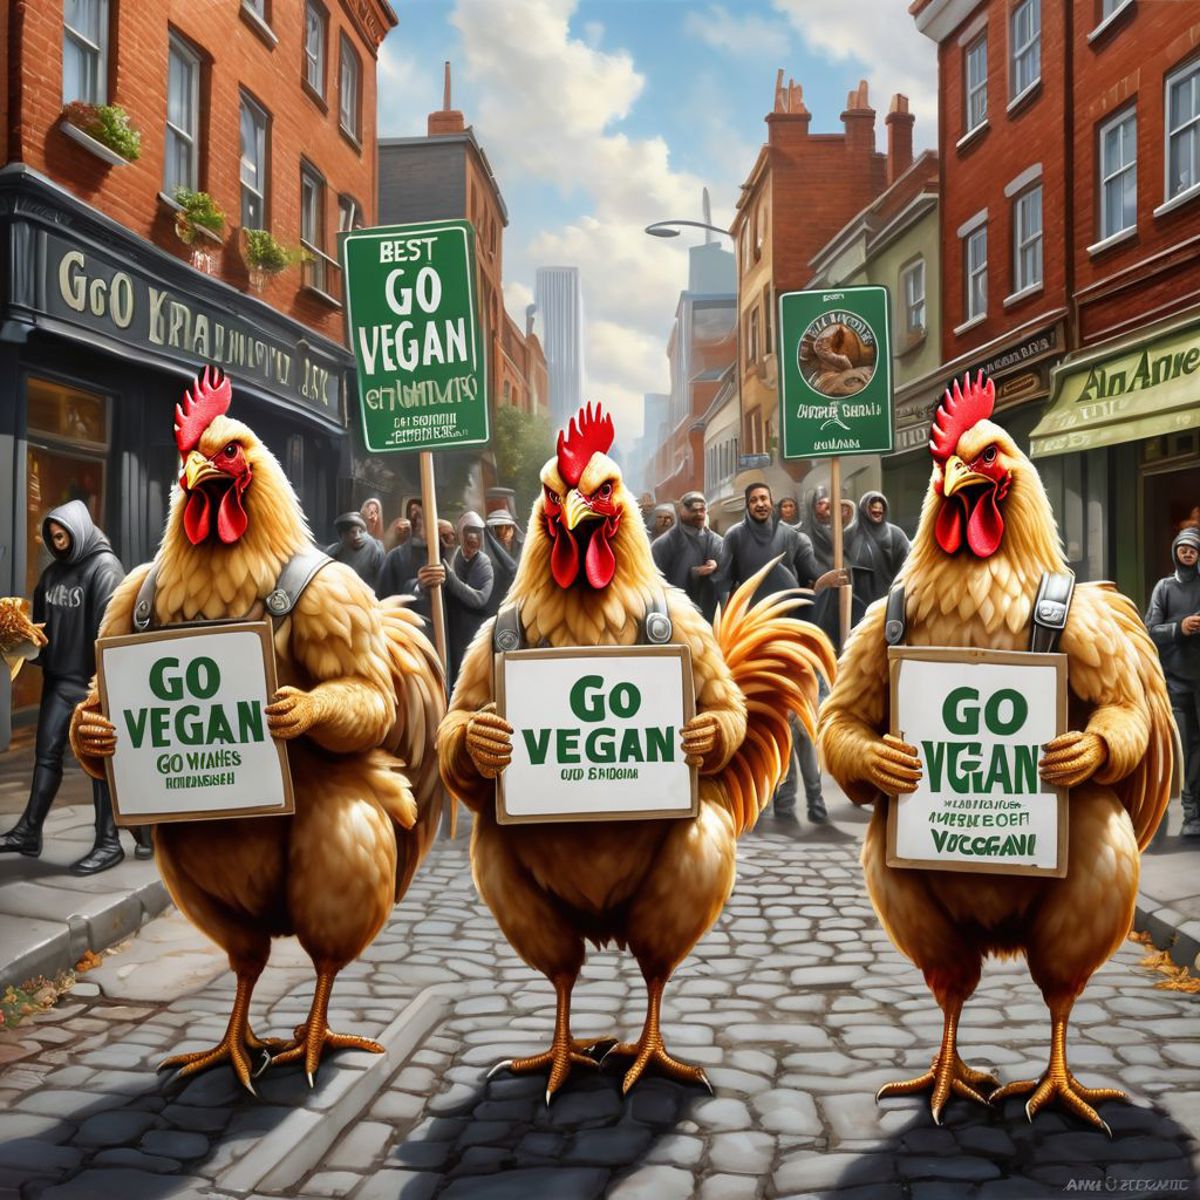 An illustration of roosters holding up Go Vegan signs with a cobblestone street.